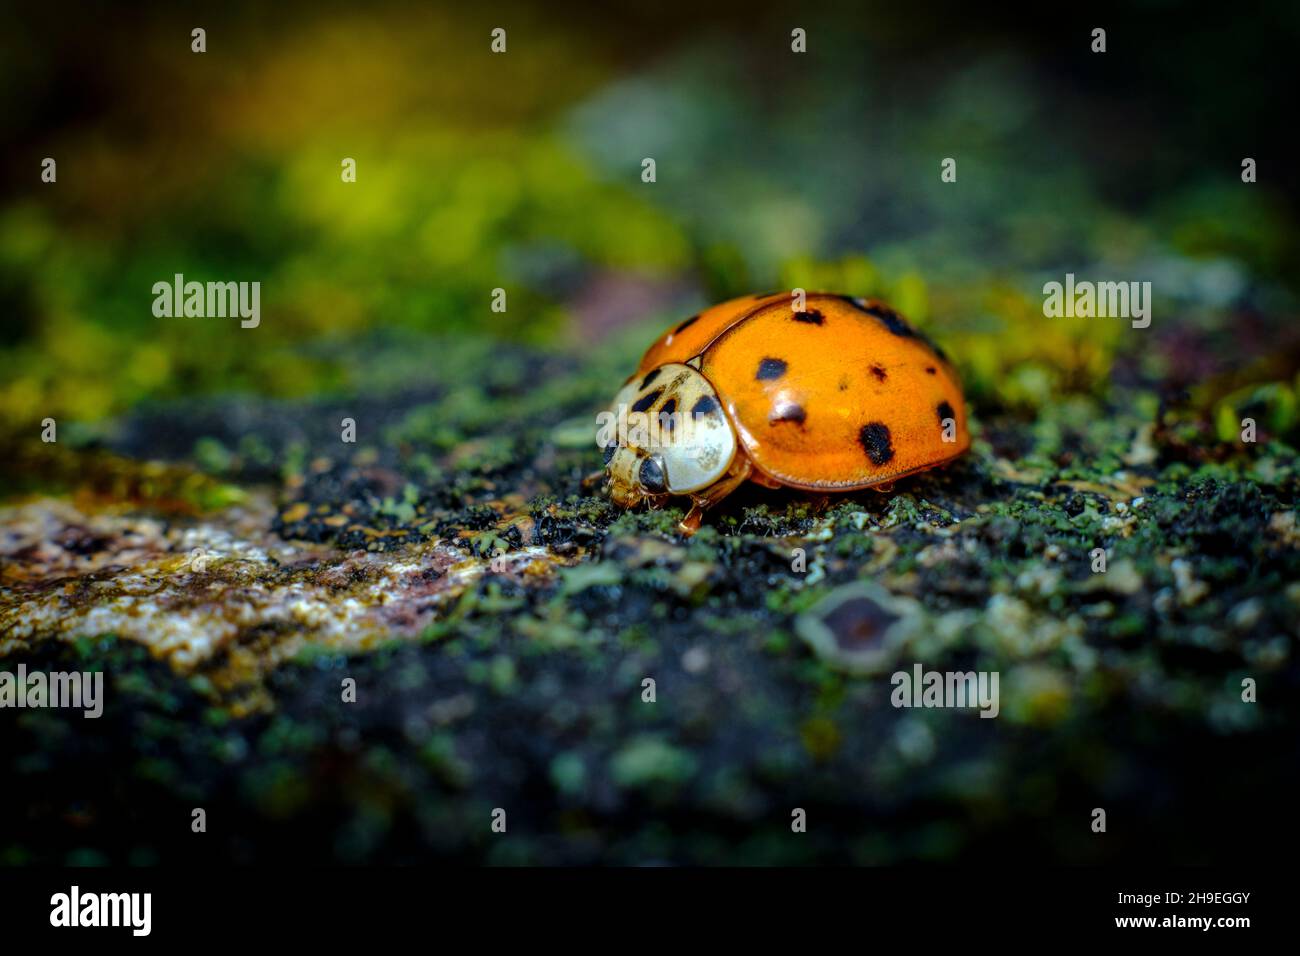 Invasive species Asian ladybeetle crawling on forest floor Stock Photo